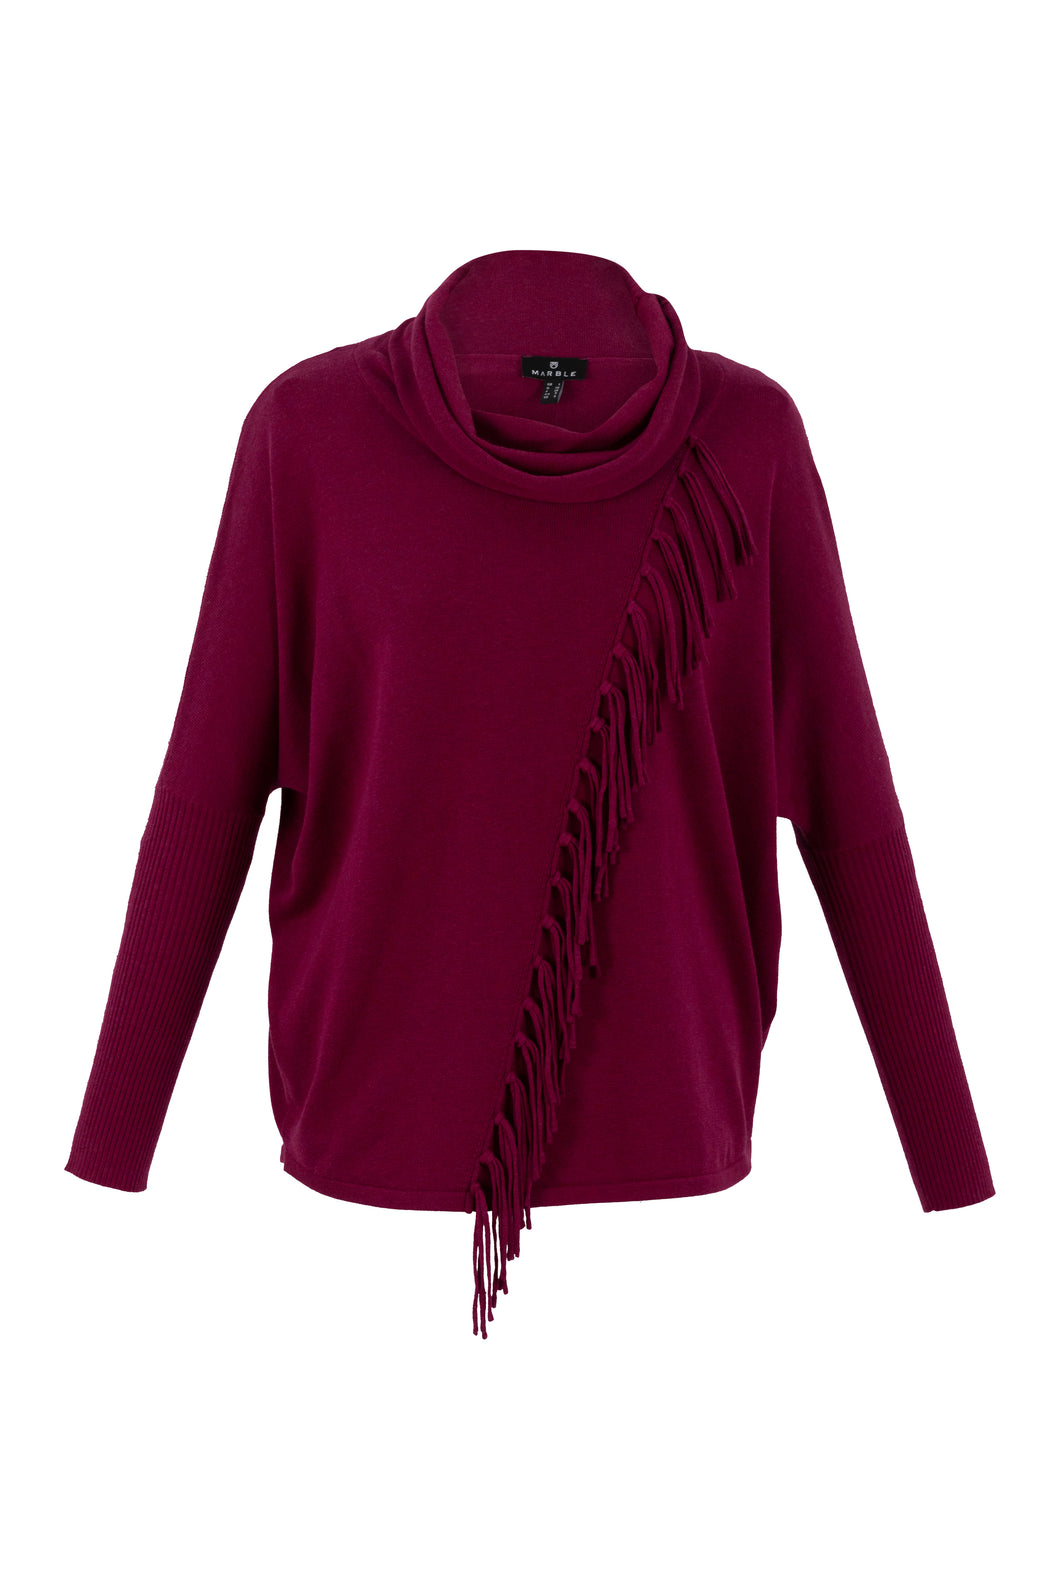 Marble Berry Asymmetric Fringe Detail Sweater with Soft Cowl Neck - 100% Cotton